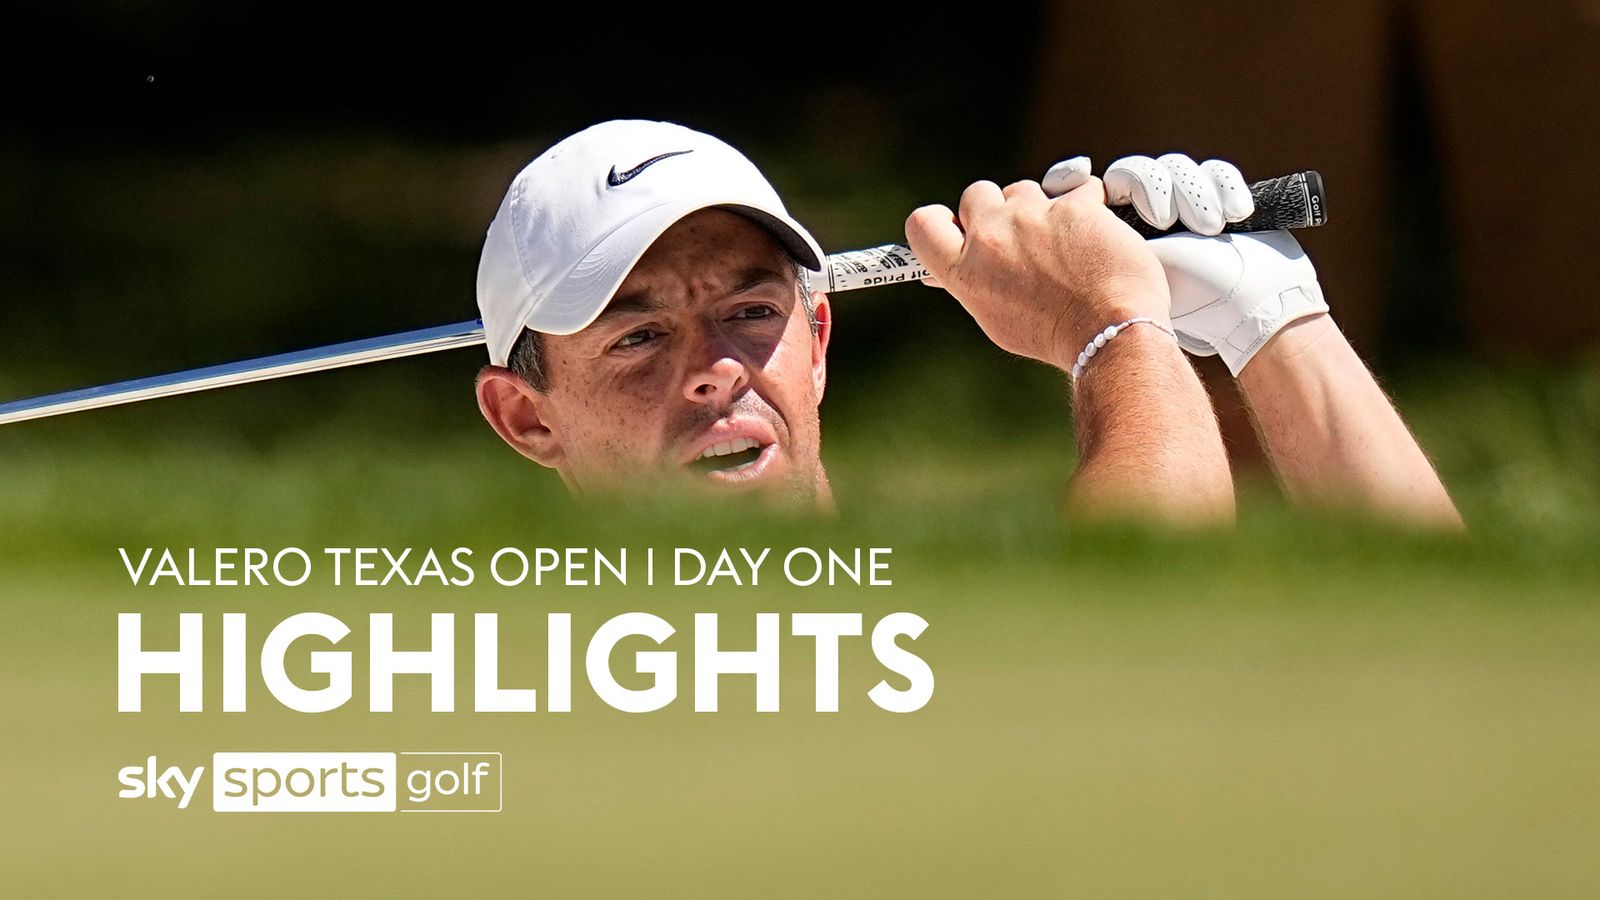 Valero Texas Open Rory McIlroy six back as Akshay Bhatia leads after